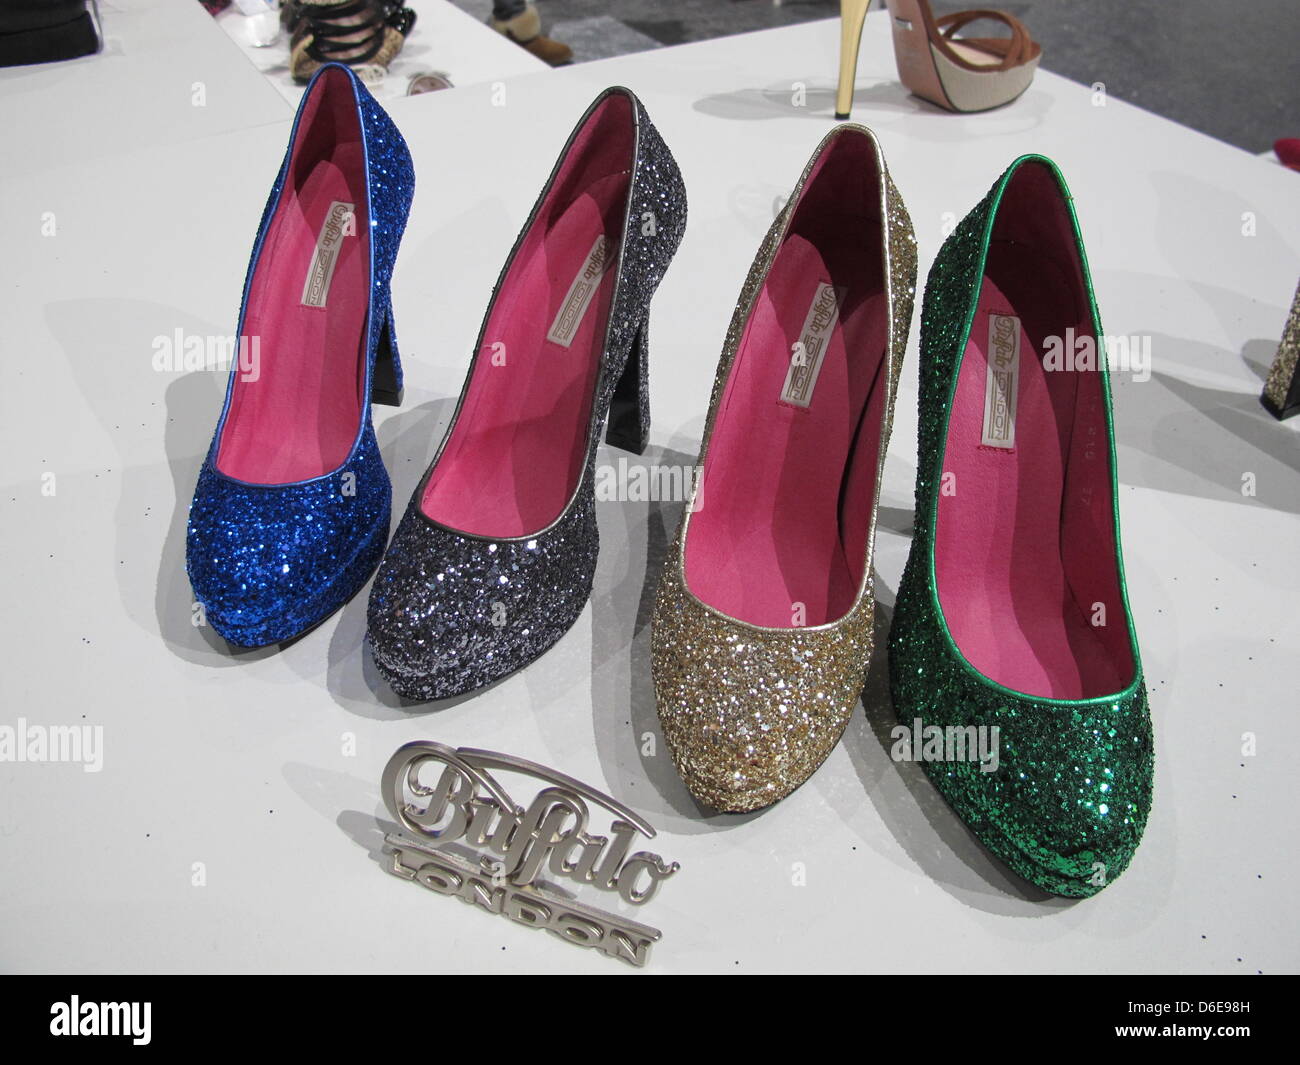 Shoes of the brand Buffalo are seen at the fashion show Bread & Butter in Germany, 19 January 2012. Photo: Kathrin Stock Photo - Alamy